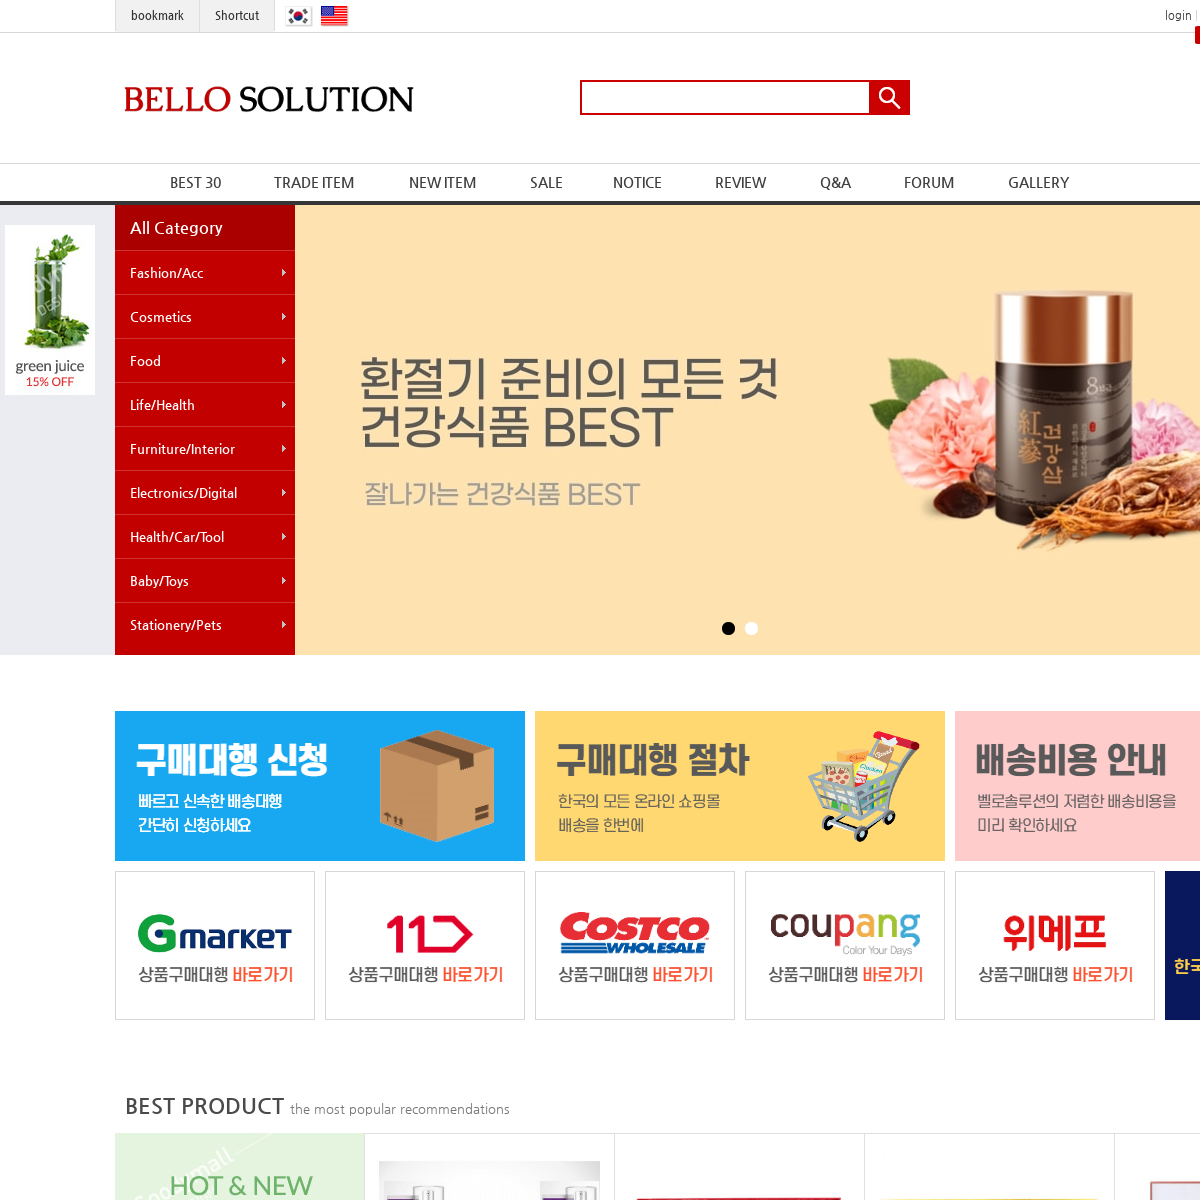 A complete backup of bellosolution.com